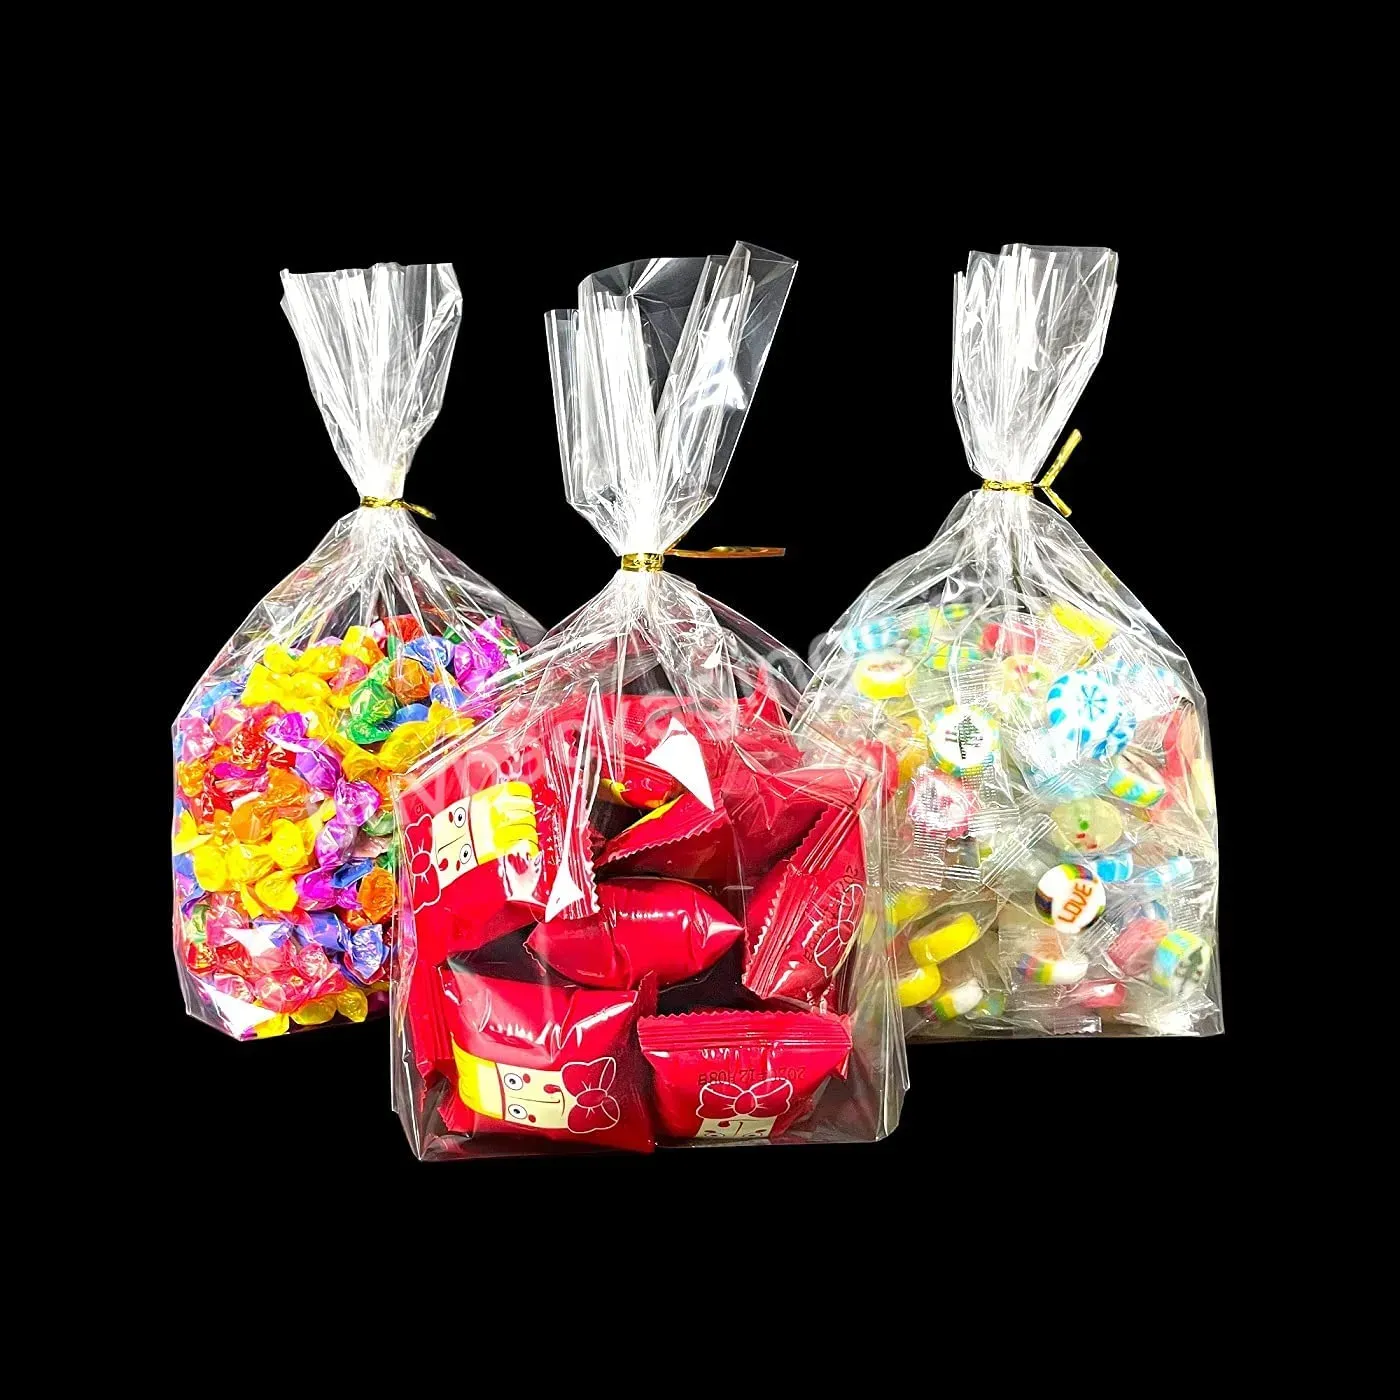 20x28 Cellophane Bags Transparent Cello Treat Flat Bag With Twist Ties Bopp Clear For Bread Candy Chocolate Gift Cellophane Bags - Buy Cellophane Bags,Clear Plastic Bags,Gift Bag.